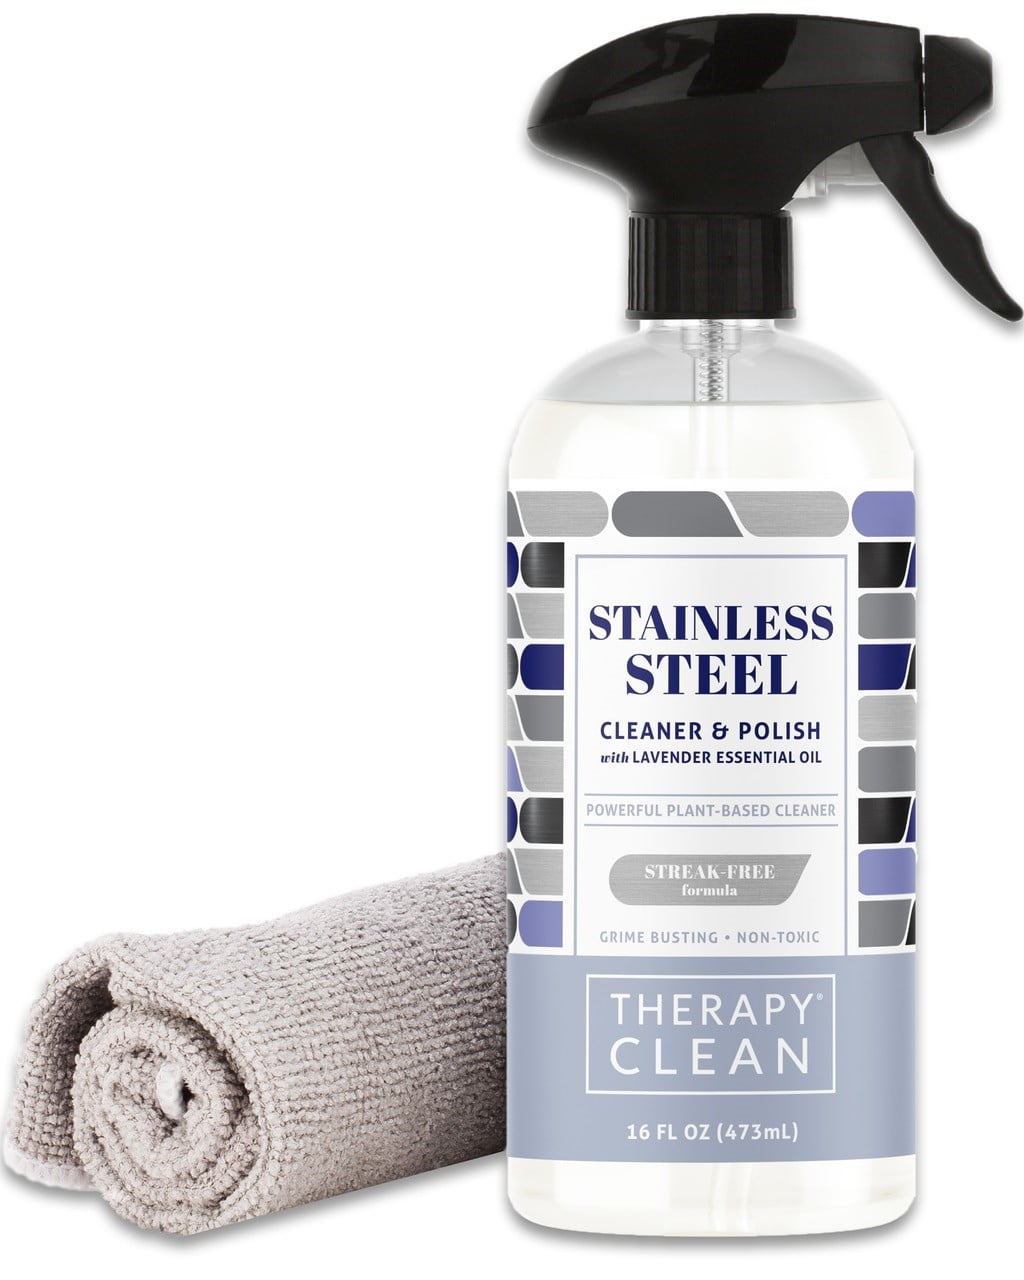 Therapy Premium Stainless Steel Cleaner & Polish - Includes Large Therapy Stainless Steel Cleaner & Polish